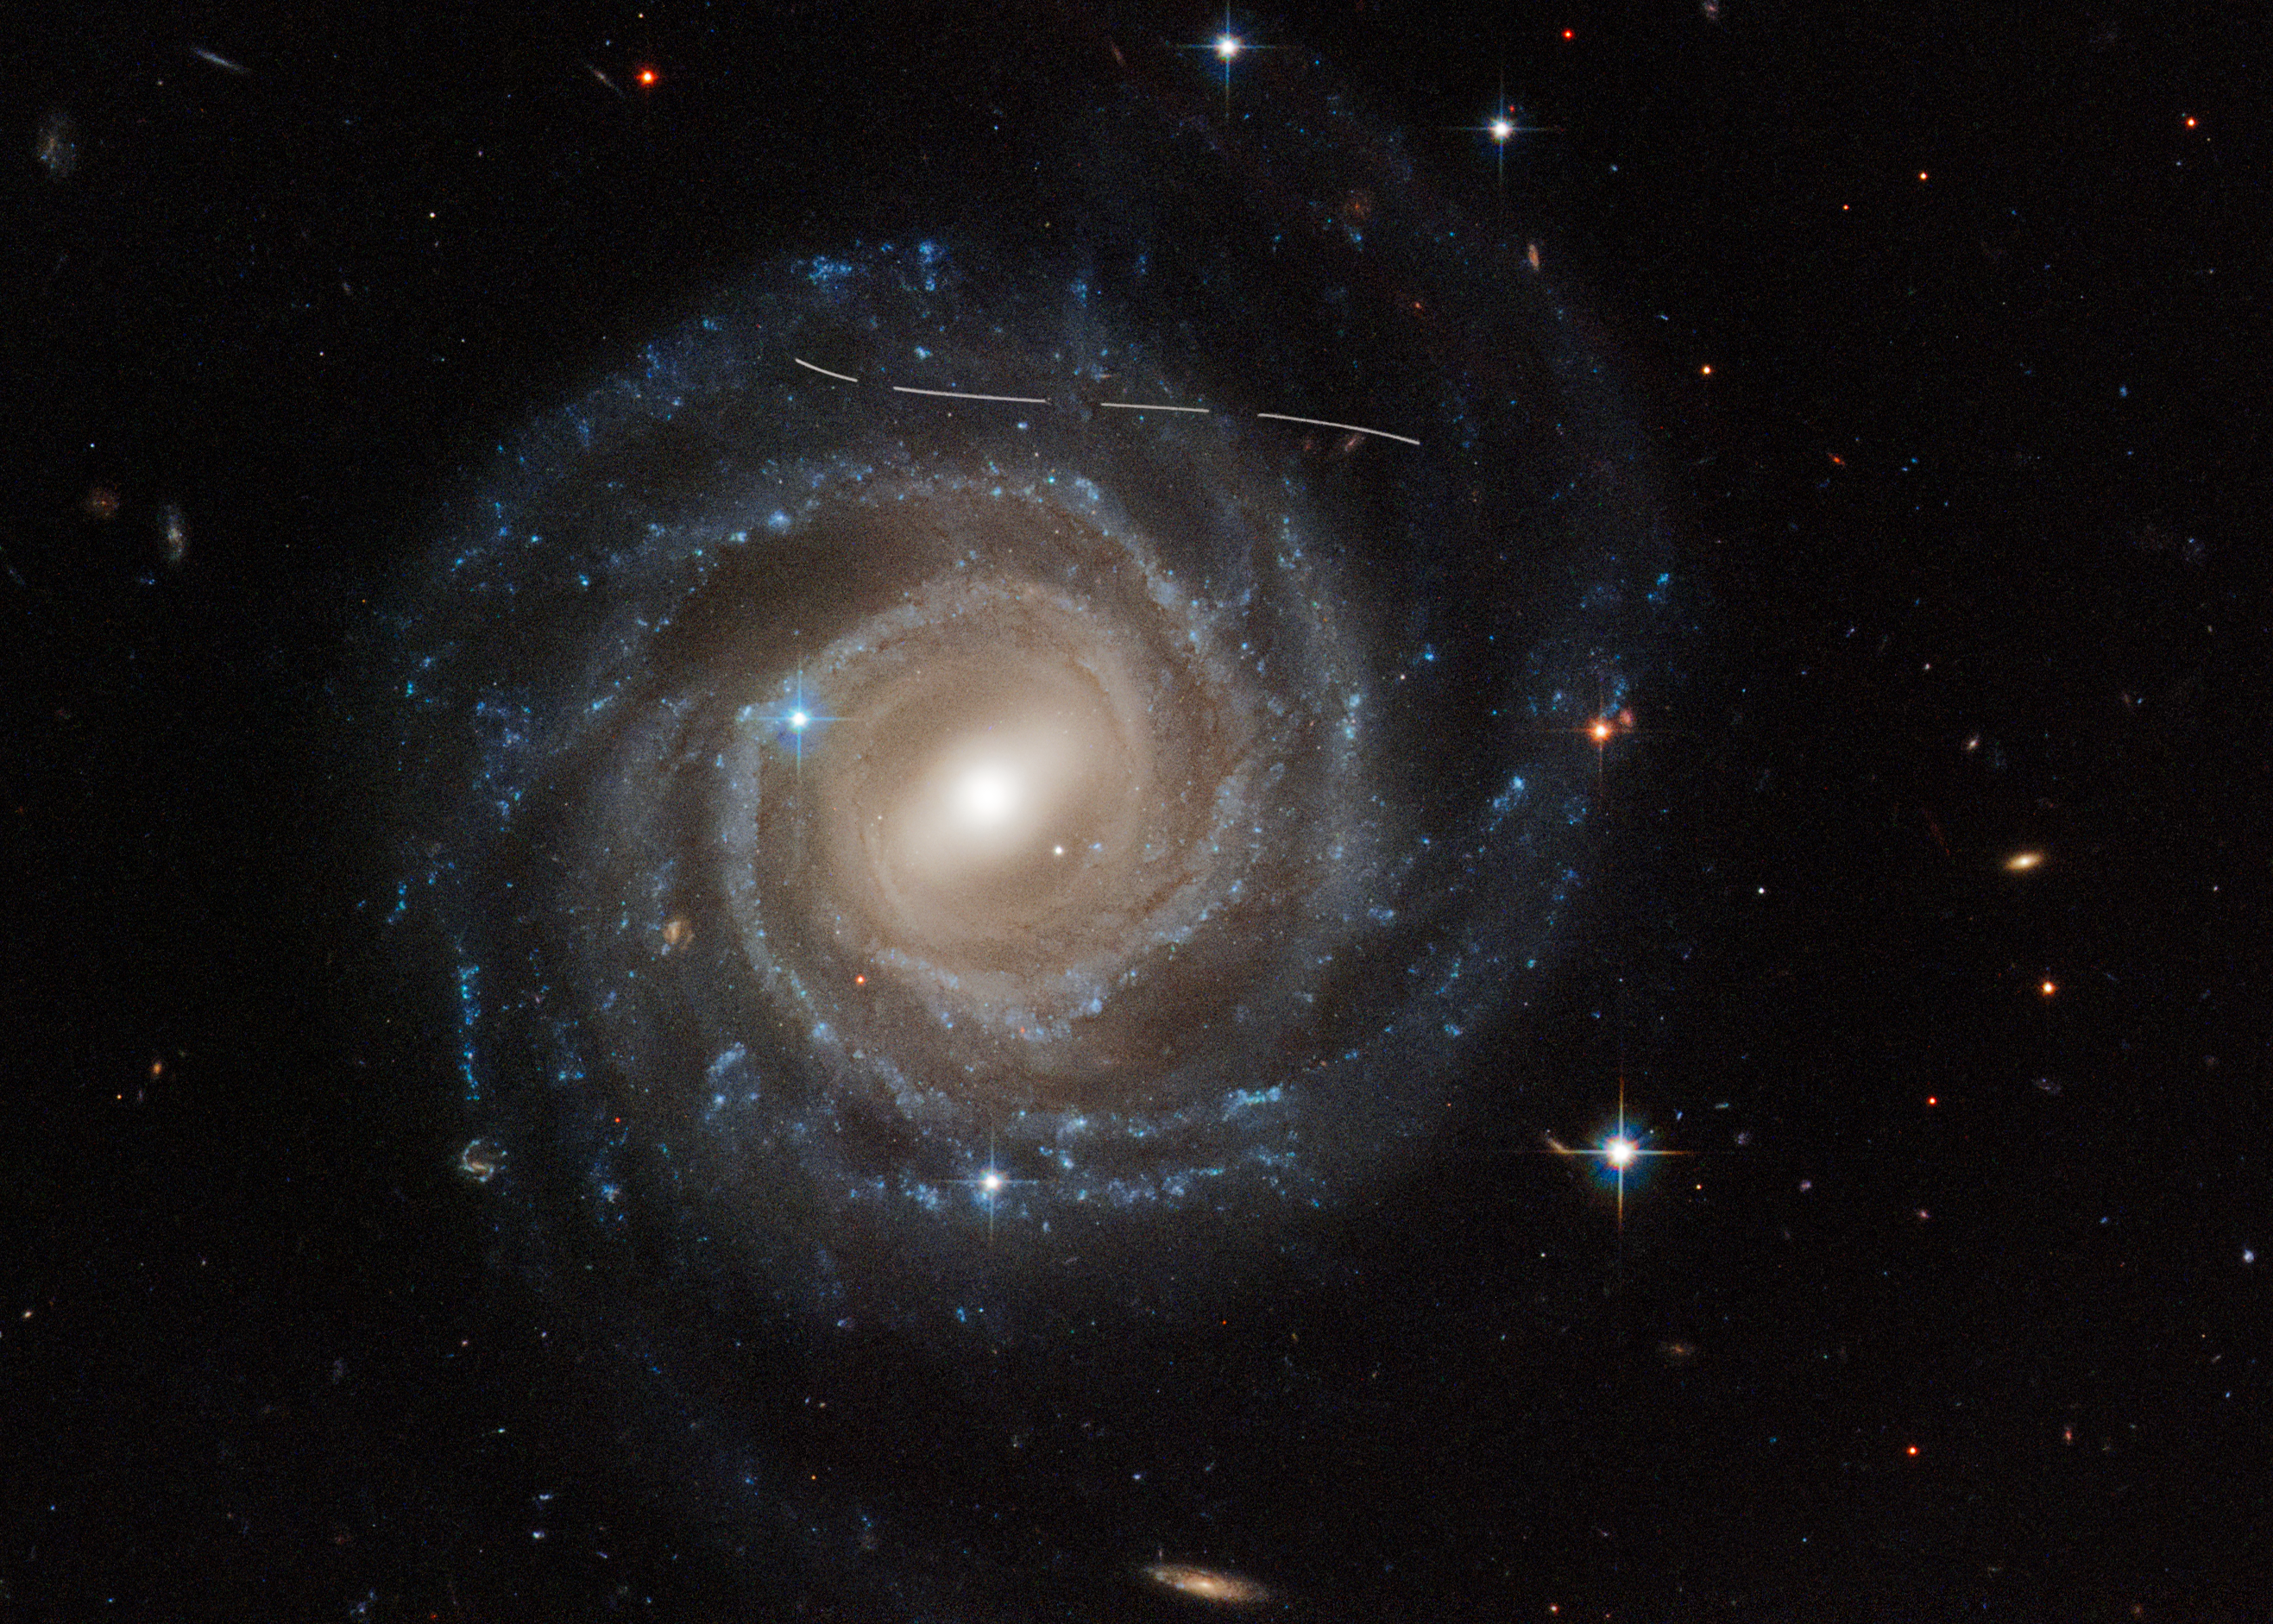 This is a Hubble Space Telescope image of the barred spiral galaxy UGC 12158. The majestic galaxy has a pinwheel shape made up of bright blue stars wound around a yellow-white hub of central stars. The hub has a slash of stars across it, called a bar. The galaxy is tilted face-on to our view from Earth. A slightly s-shaped white line across the top is a Hubble image is of an asteroid streaking across Hubble's view. It looks dashed because the image is a combination of several exposures of the asteroid flying by like a race car.